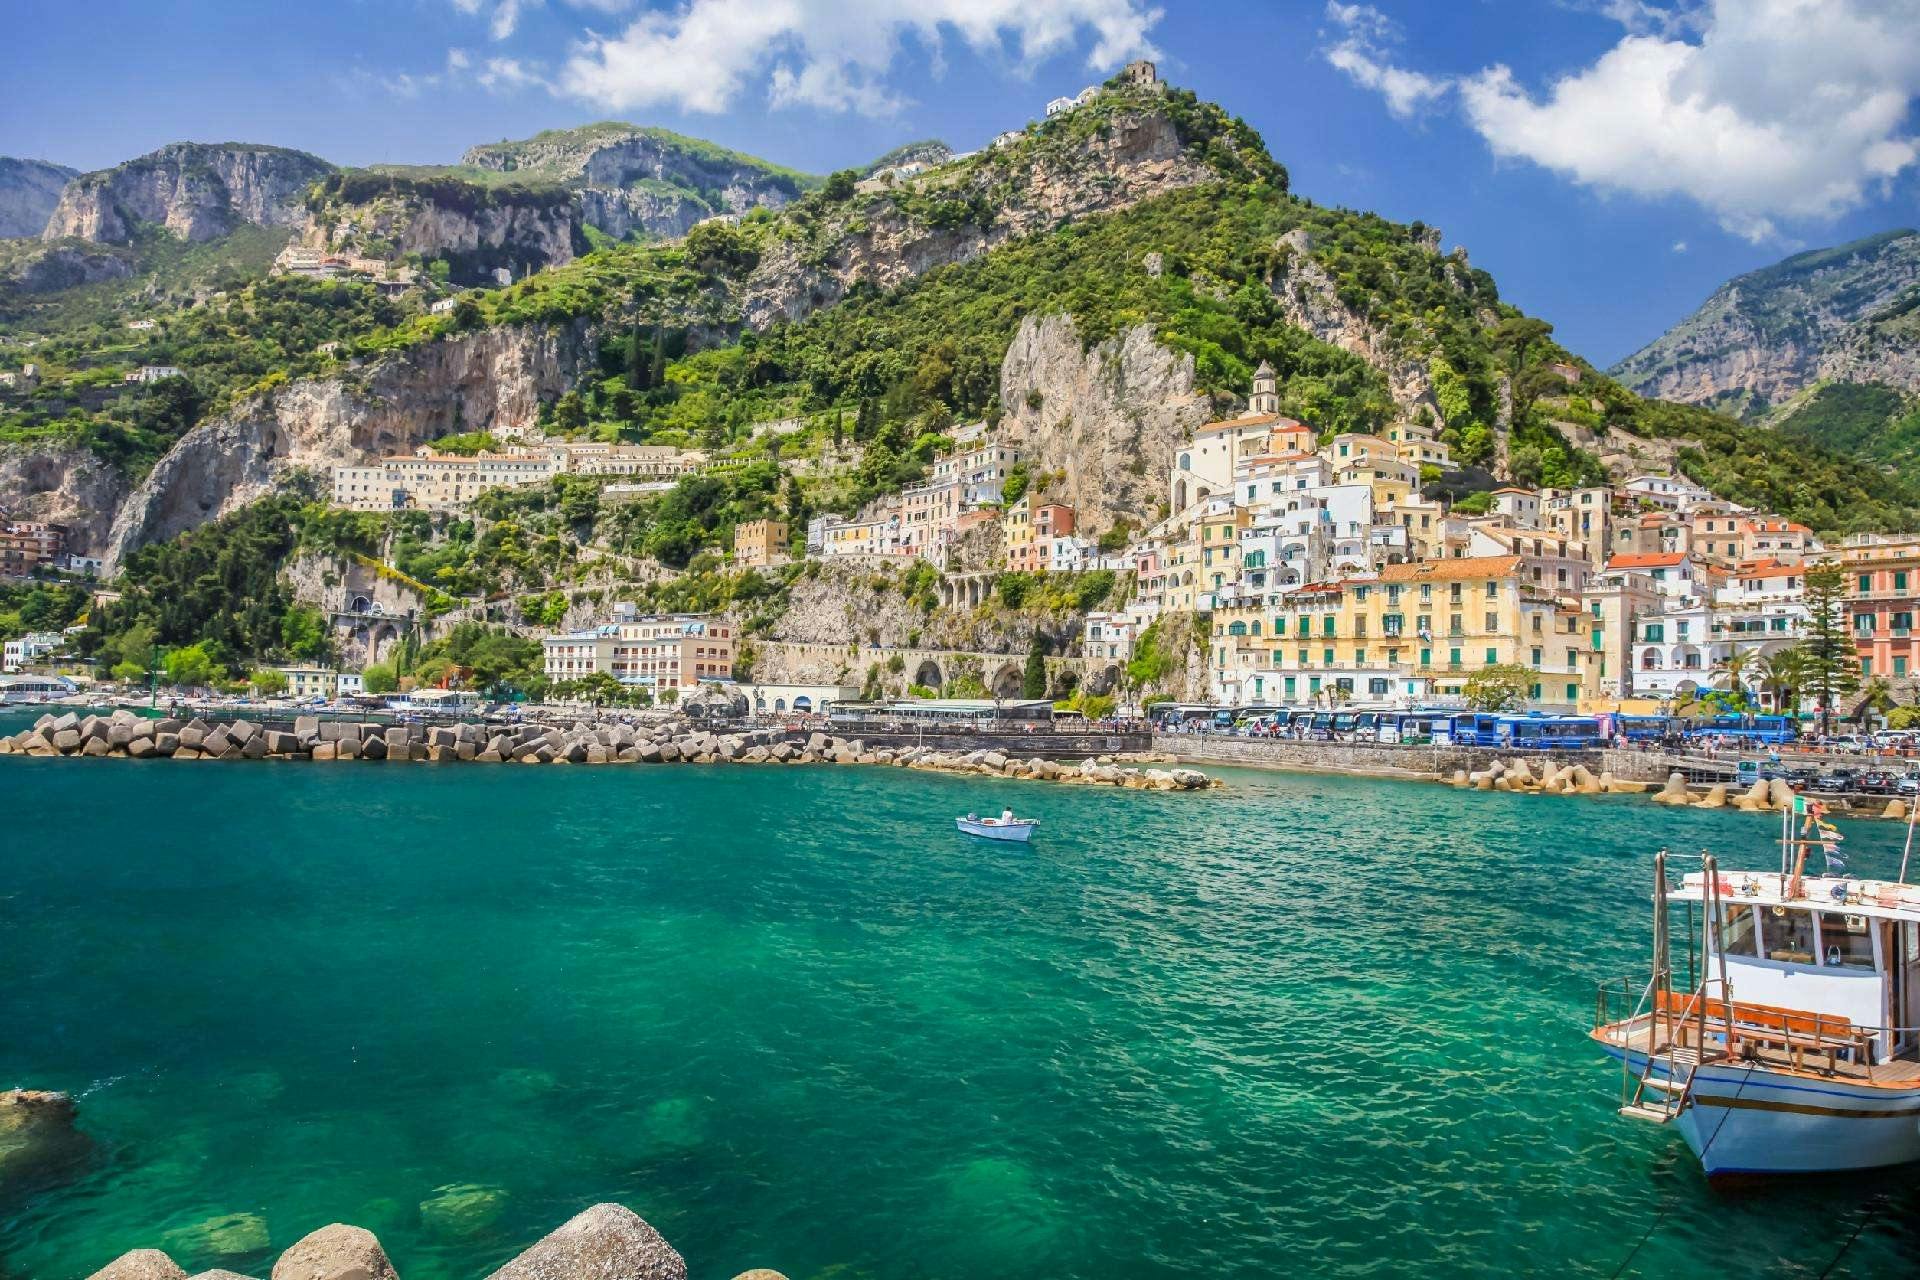 Positano and Amalfi from the port of Naples